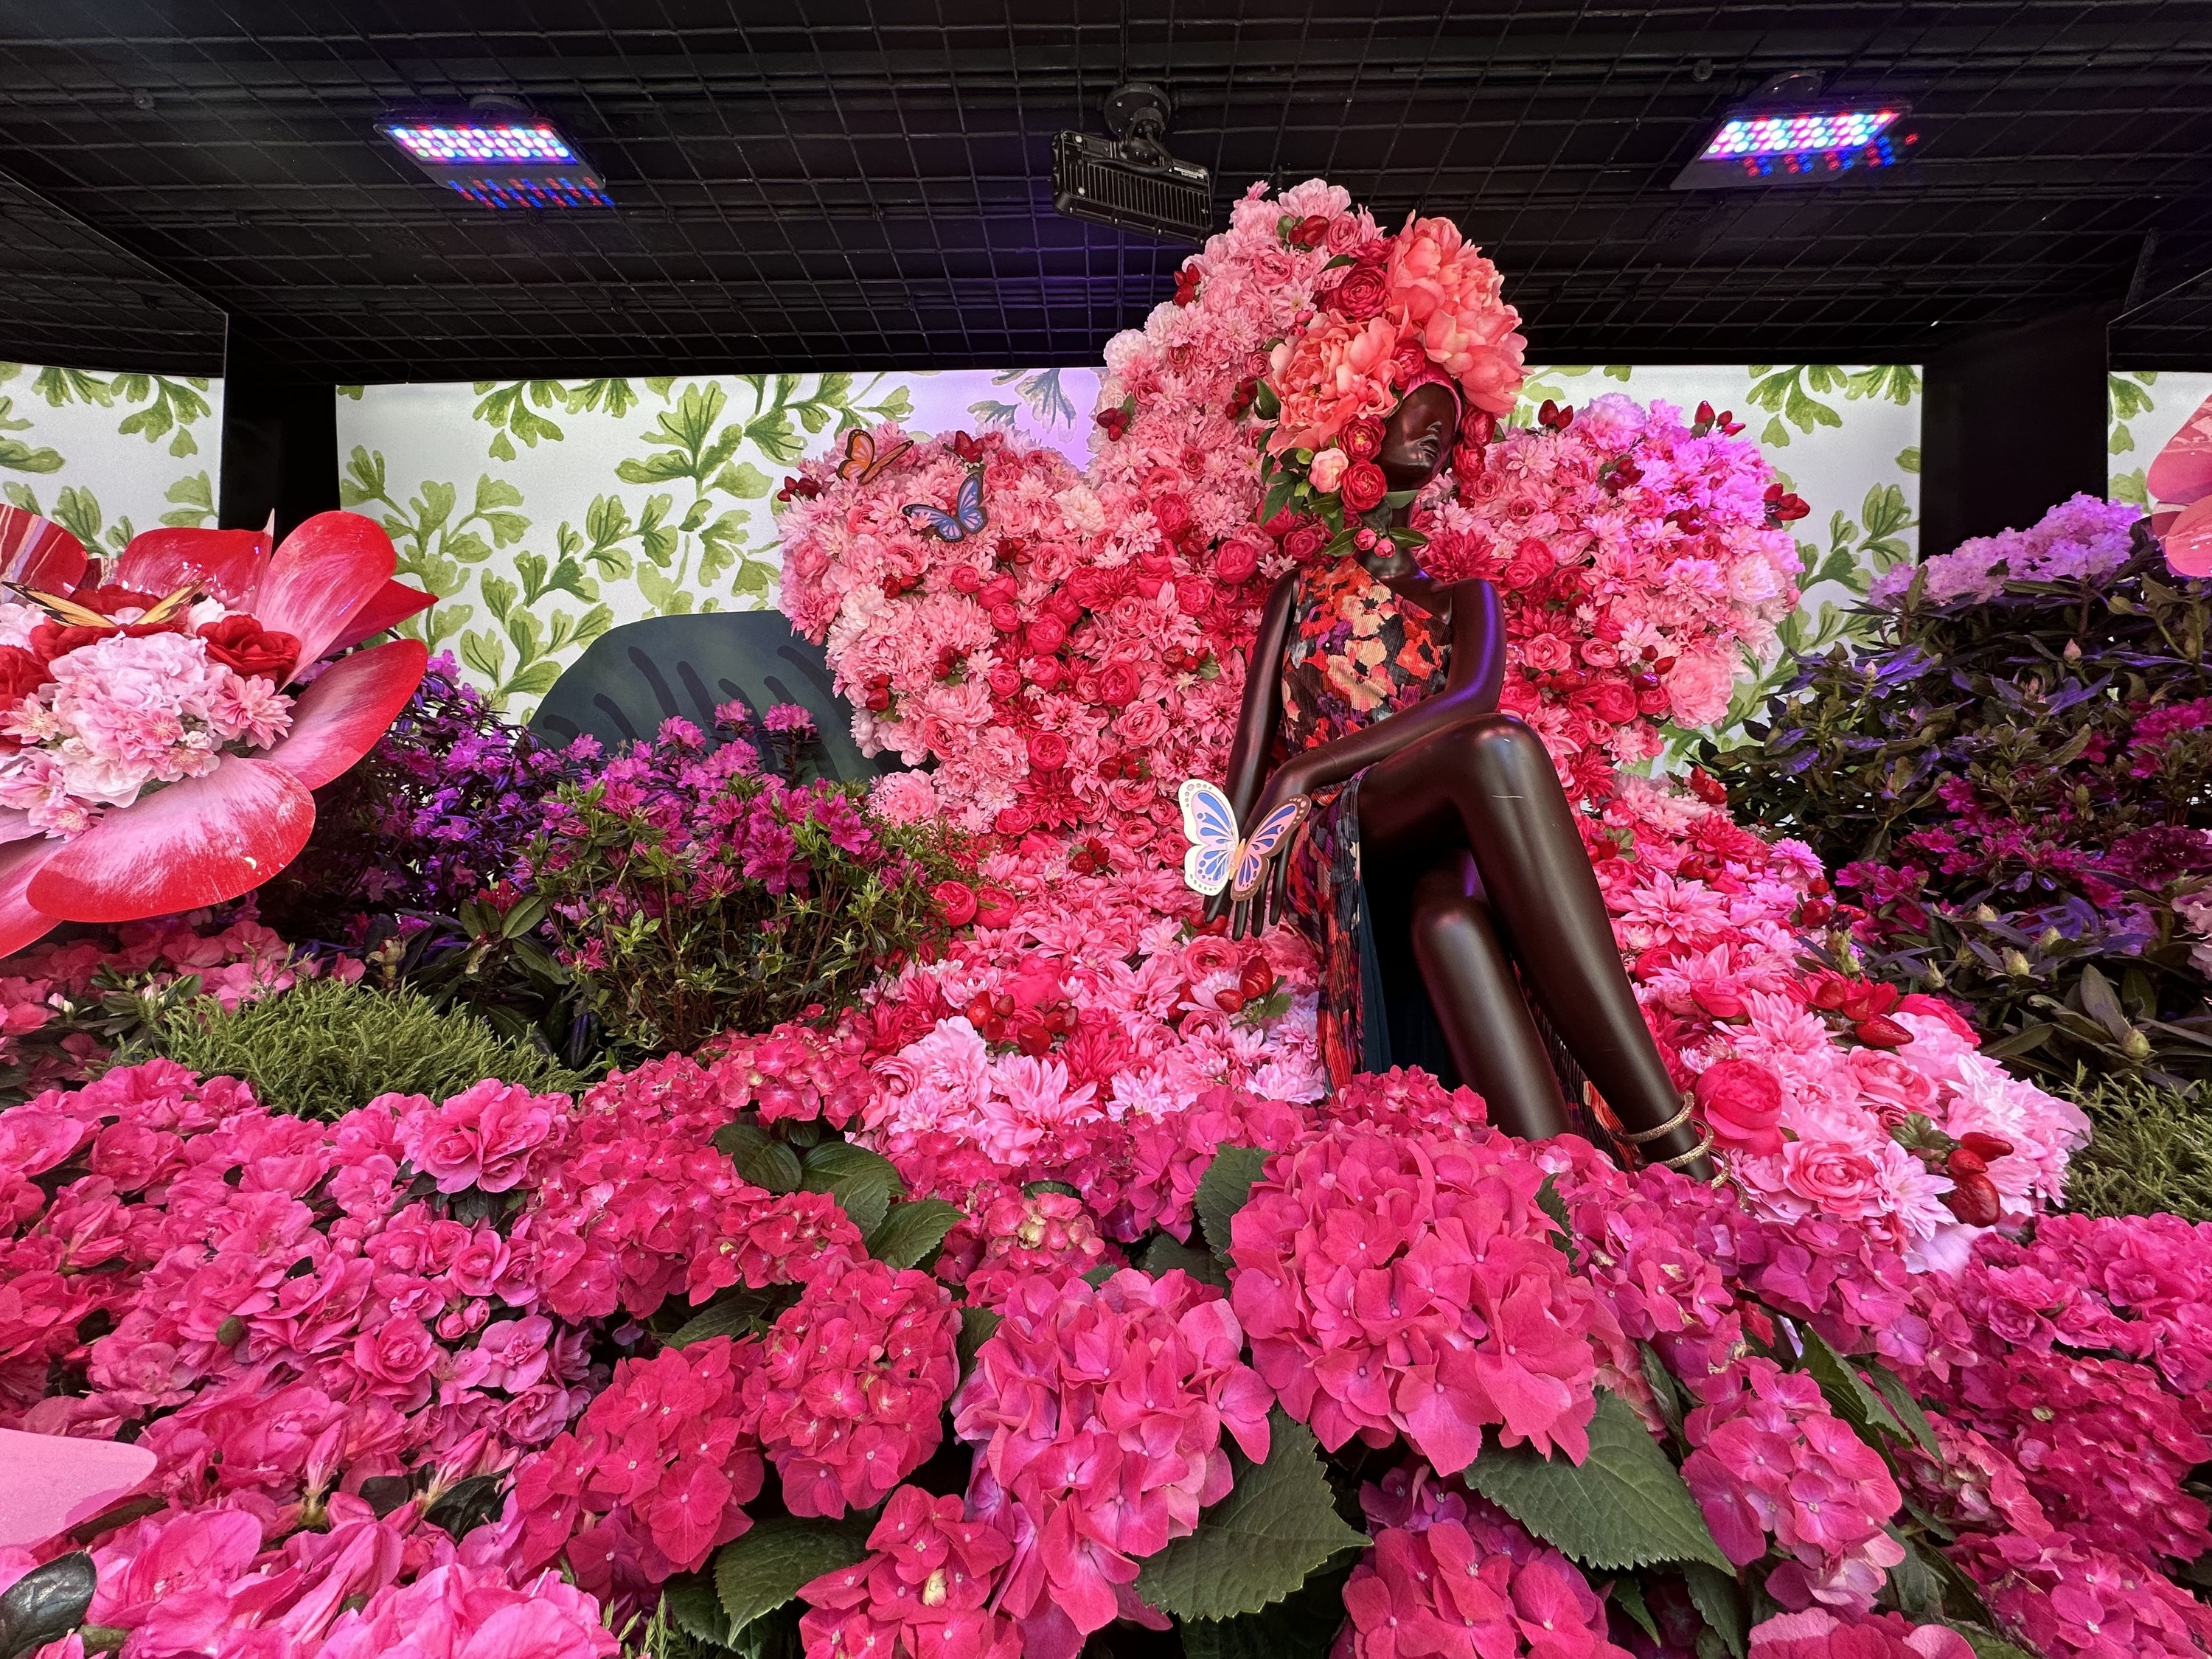 A pink floral display inside the Macy's windows for the spring flower show.